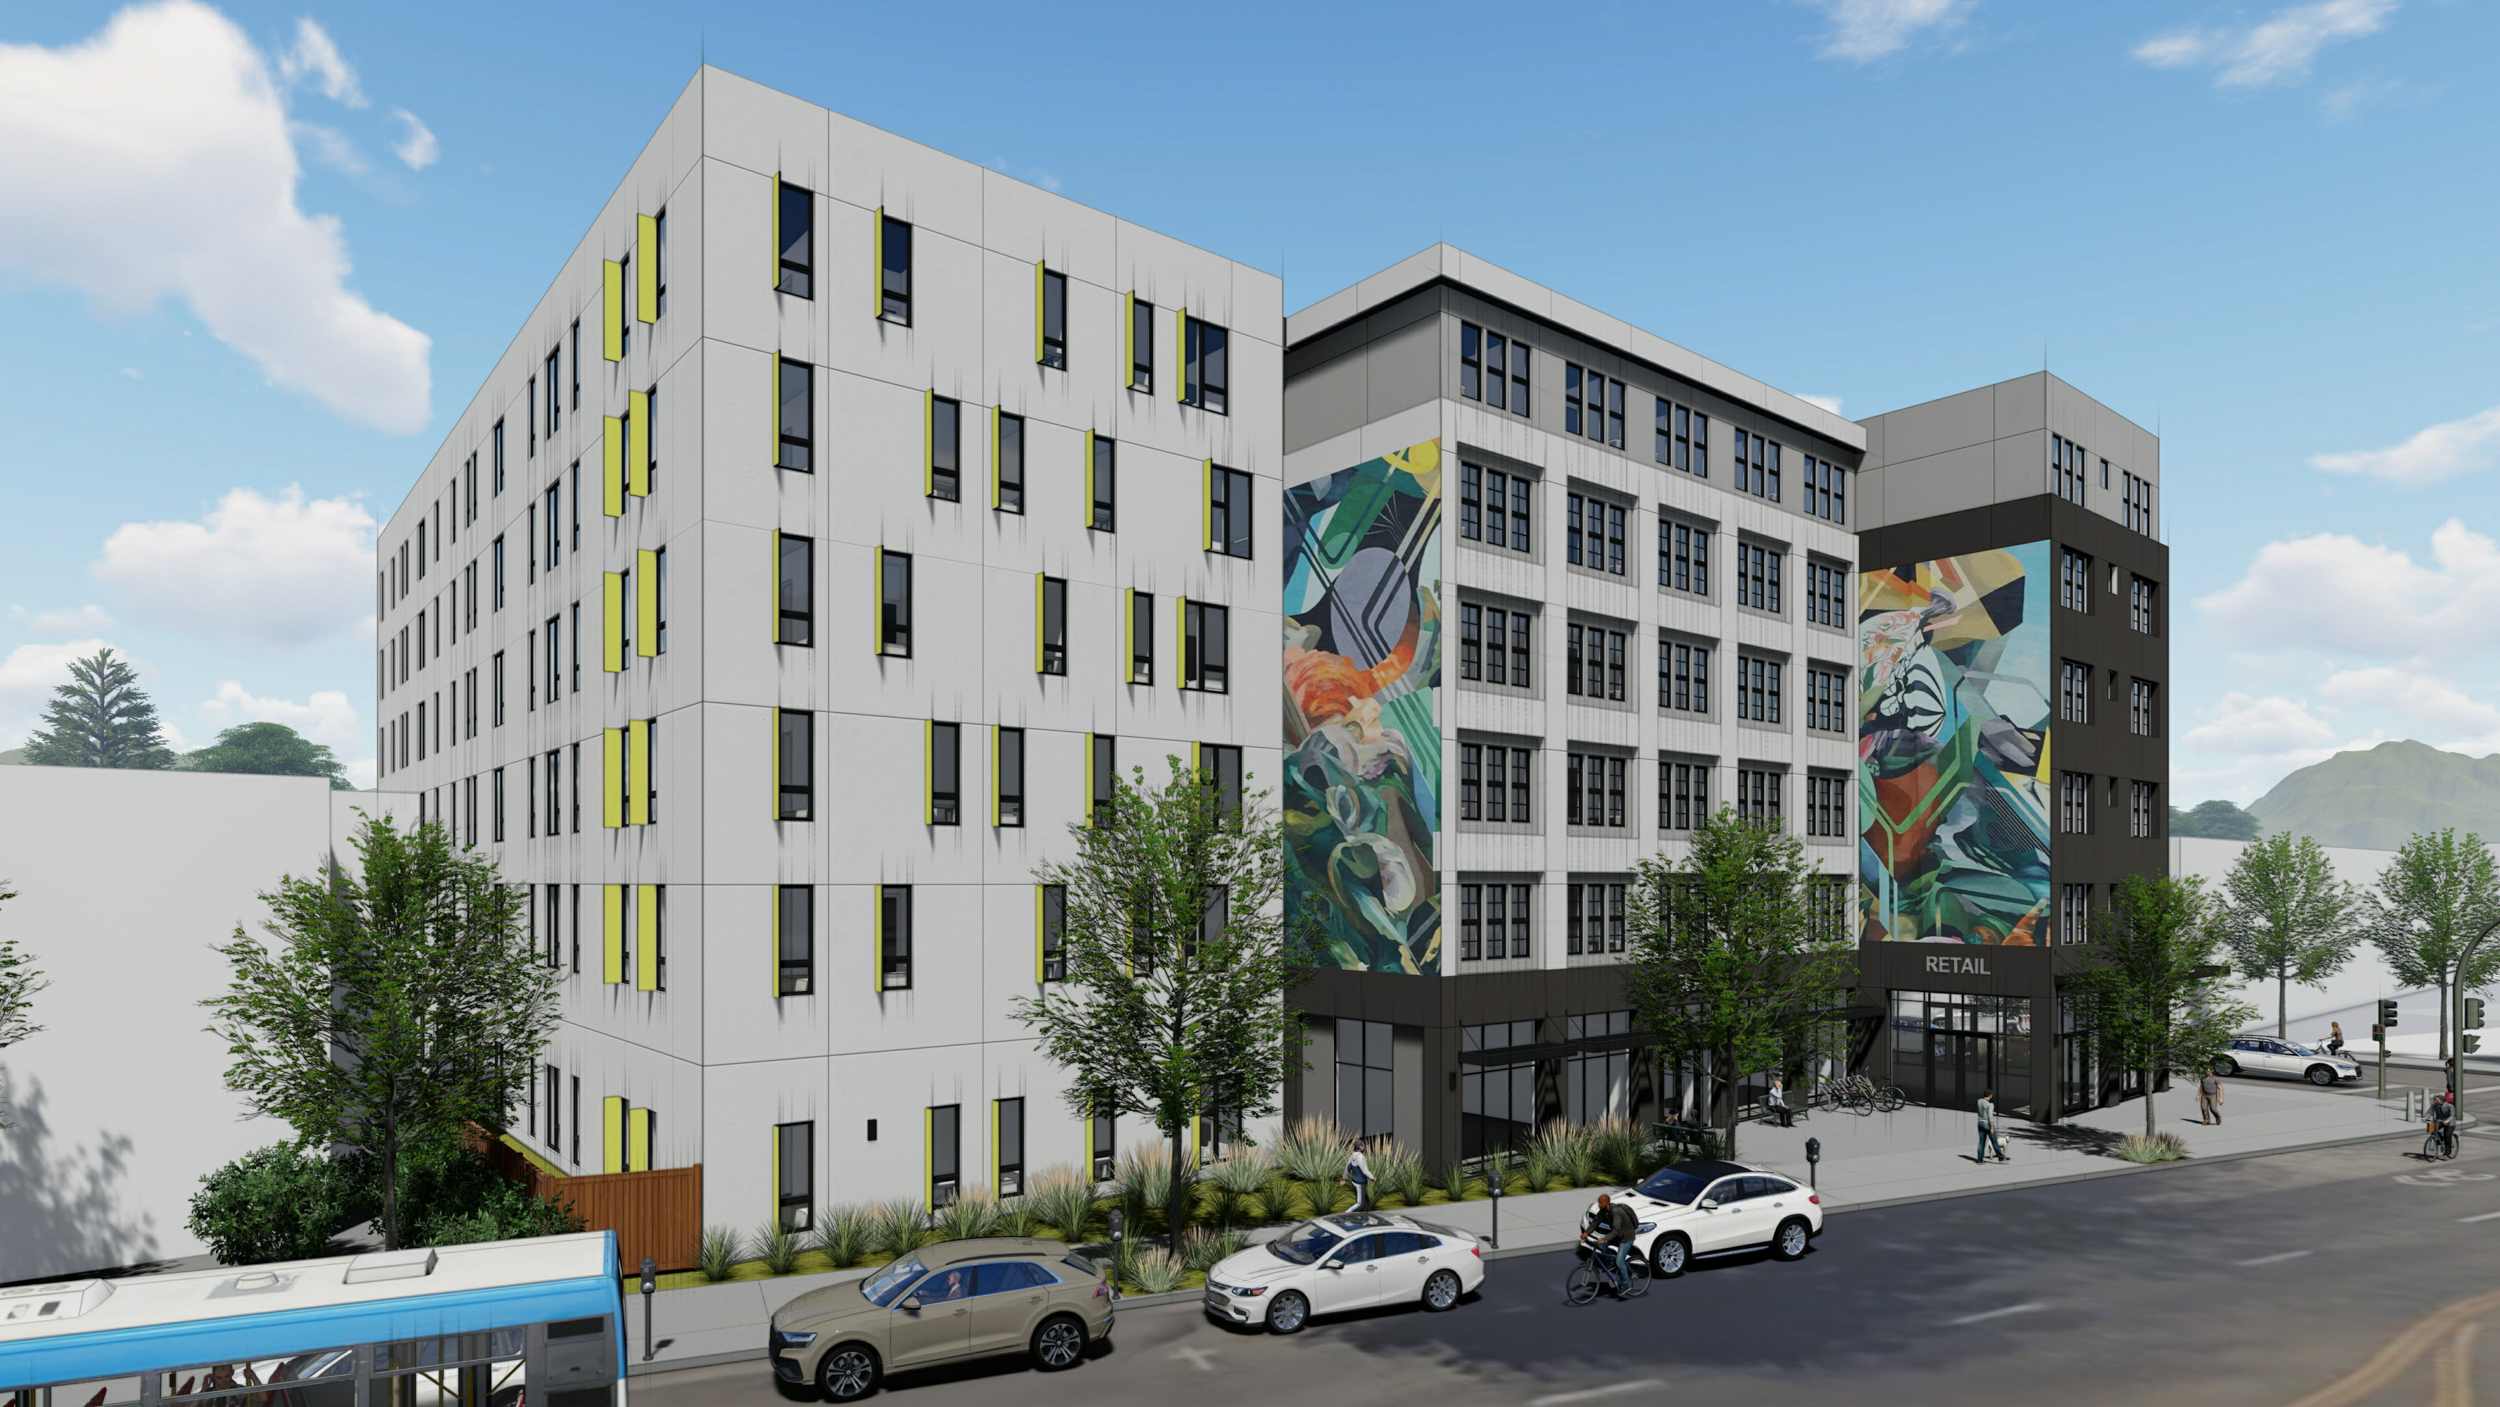 3030 Telegraph Avenue from over the avenue, rendering by Left Coast Architecture